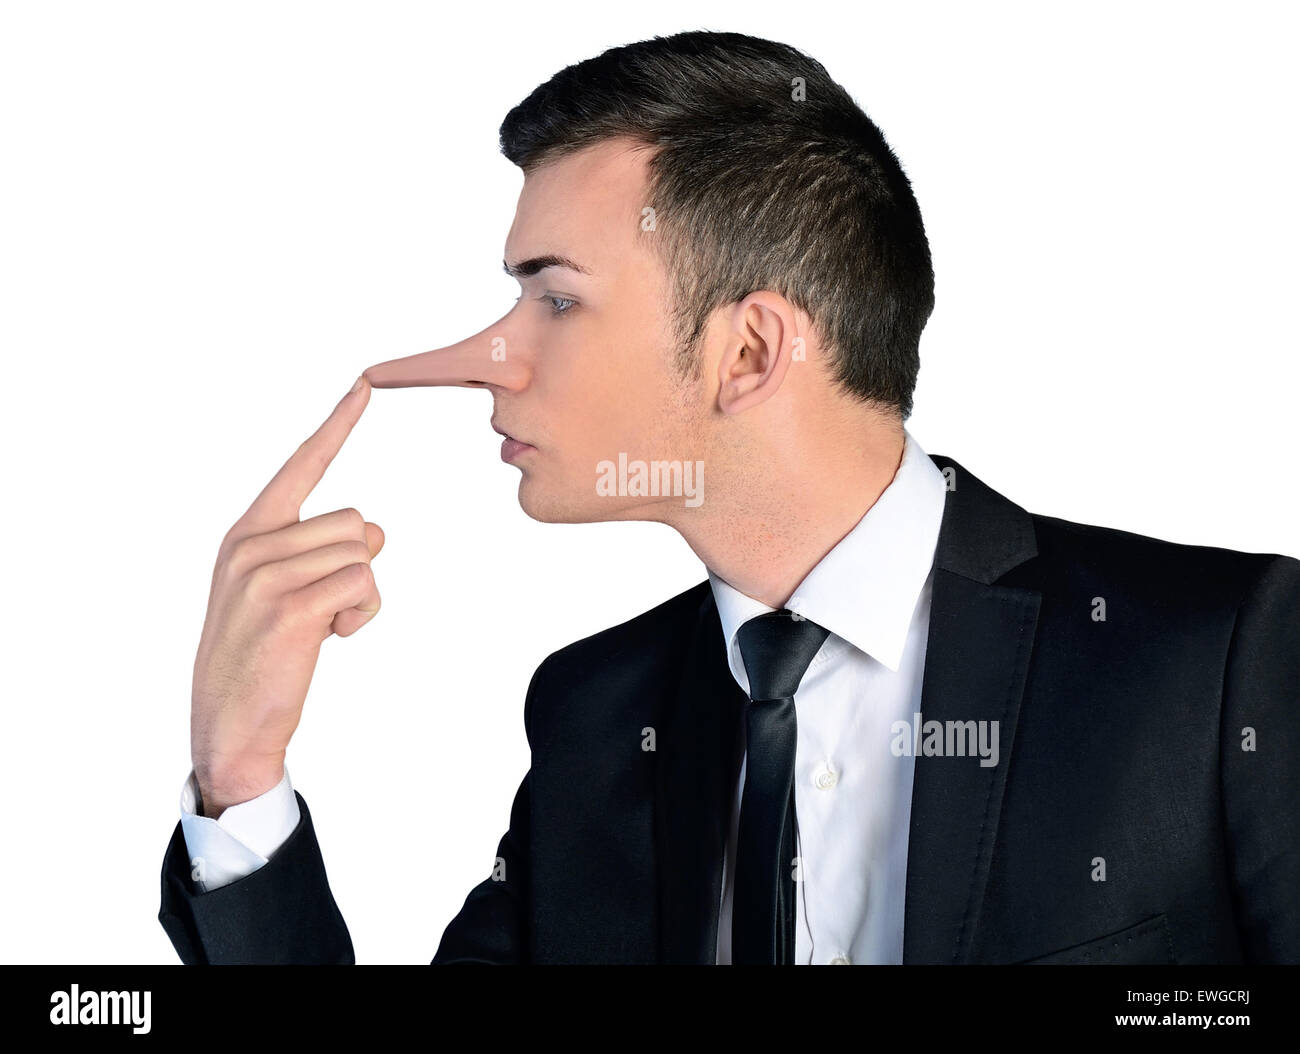 Isolated business man liar concept Stock Photo